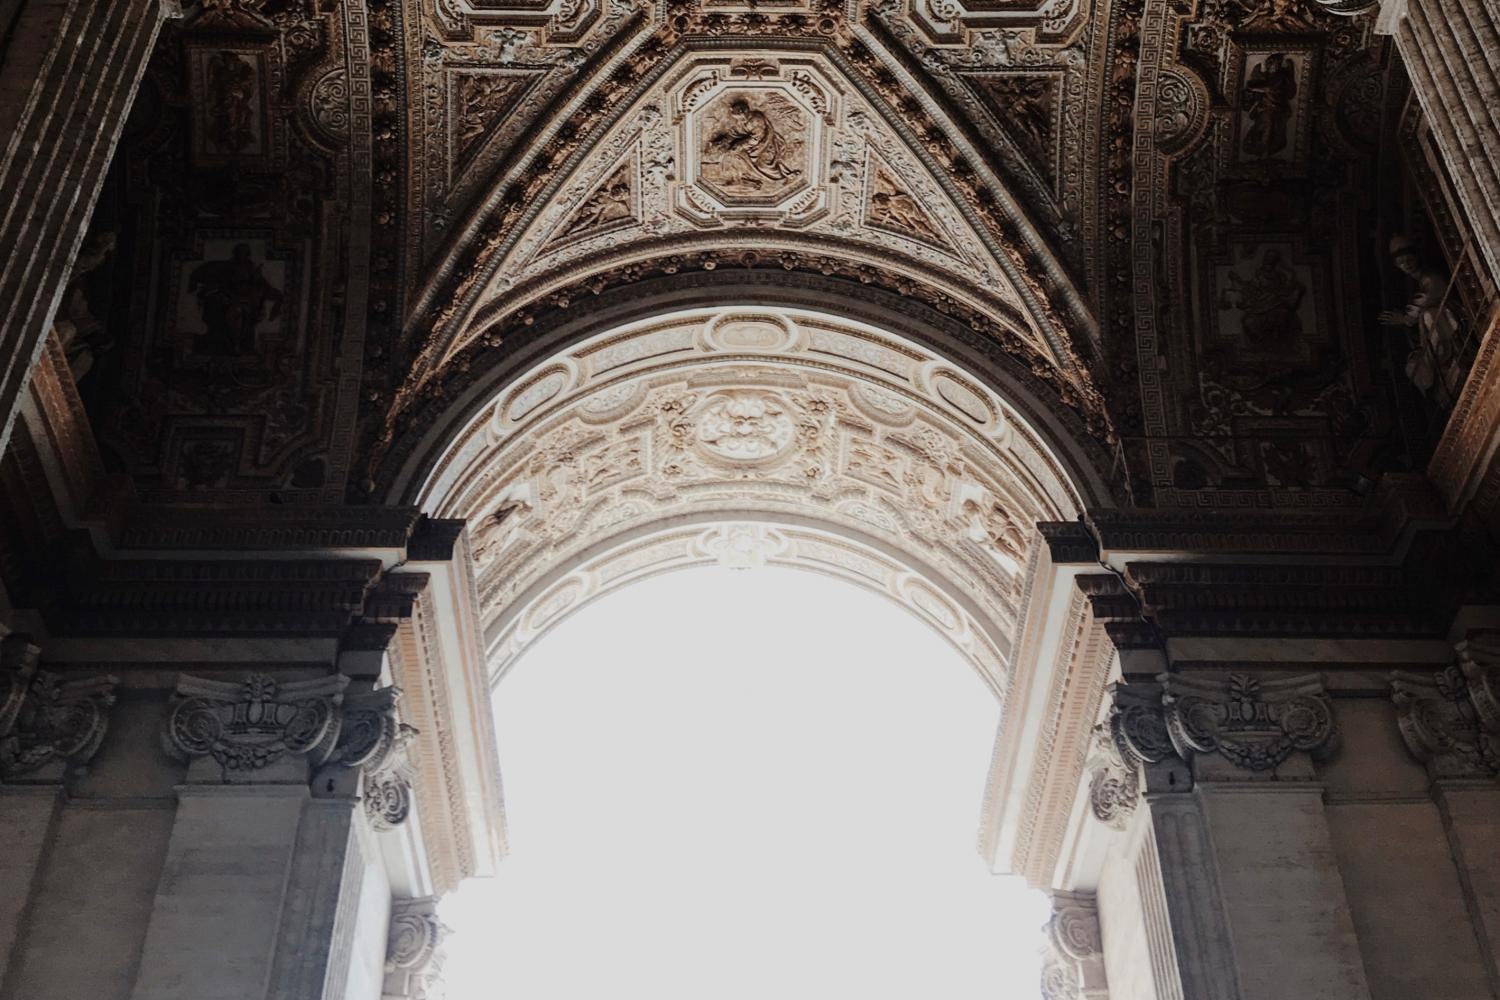 An Archway at Saint Peter's Basilica